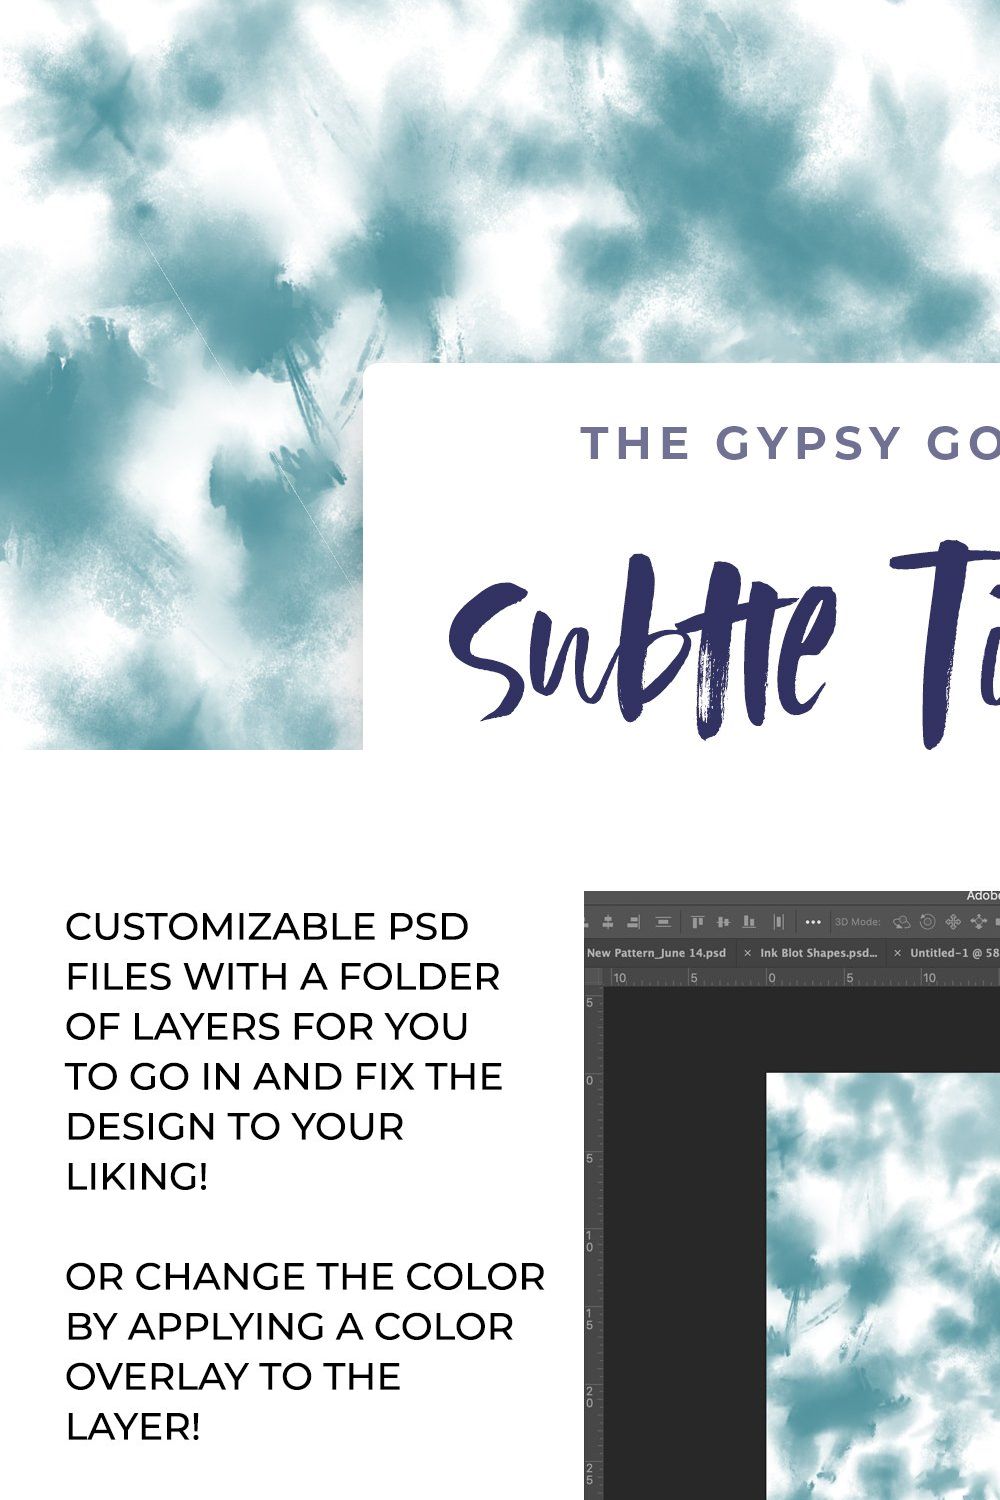 How to Create a Seamless Tie-Dye Pattern in Photoshop